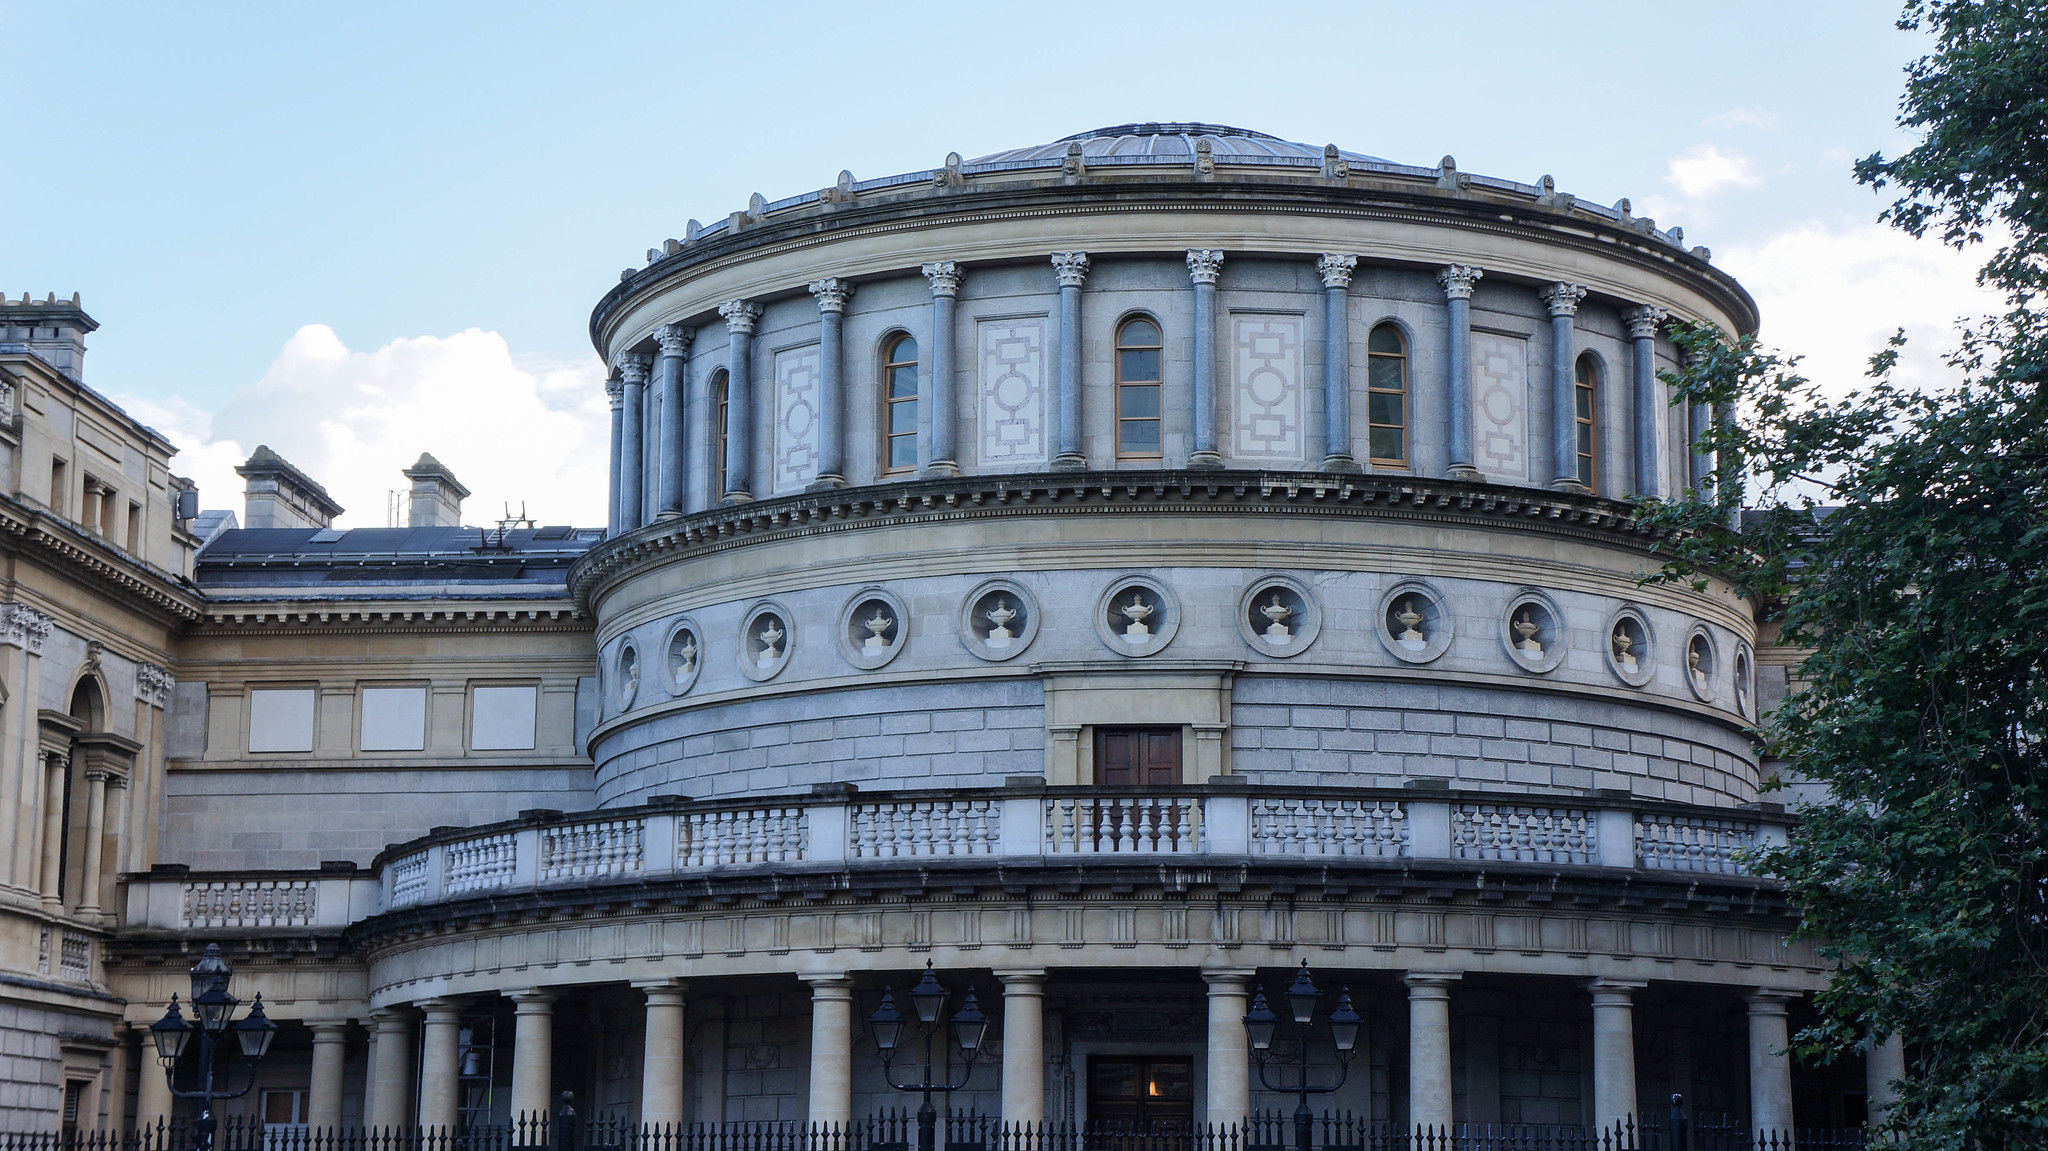 Historic exterior of the National Museum of Ireland, one of the best places to visit in Ireland, with articulate ornamentation on its walls